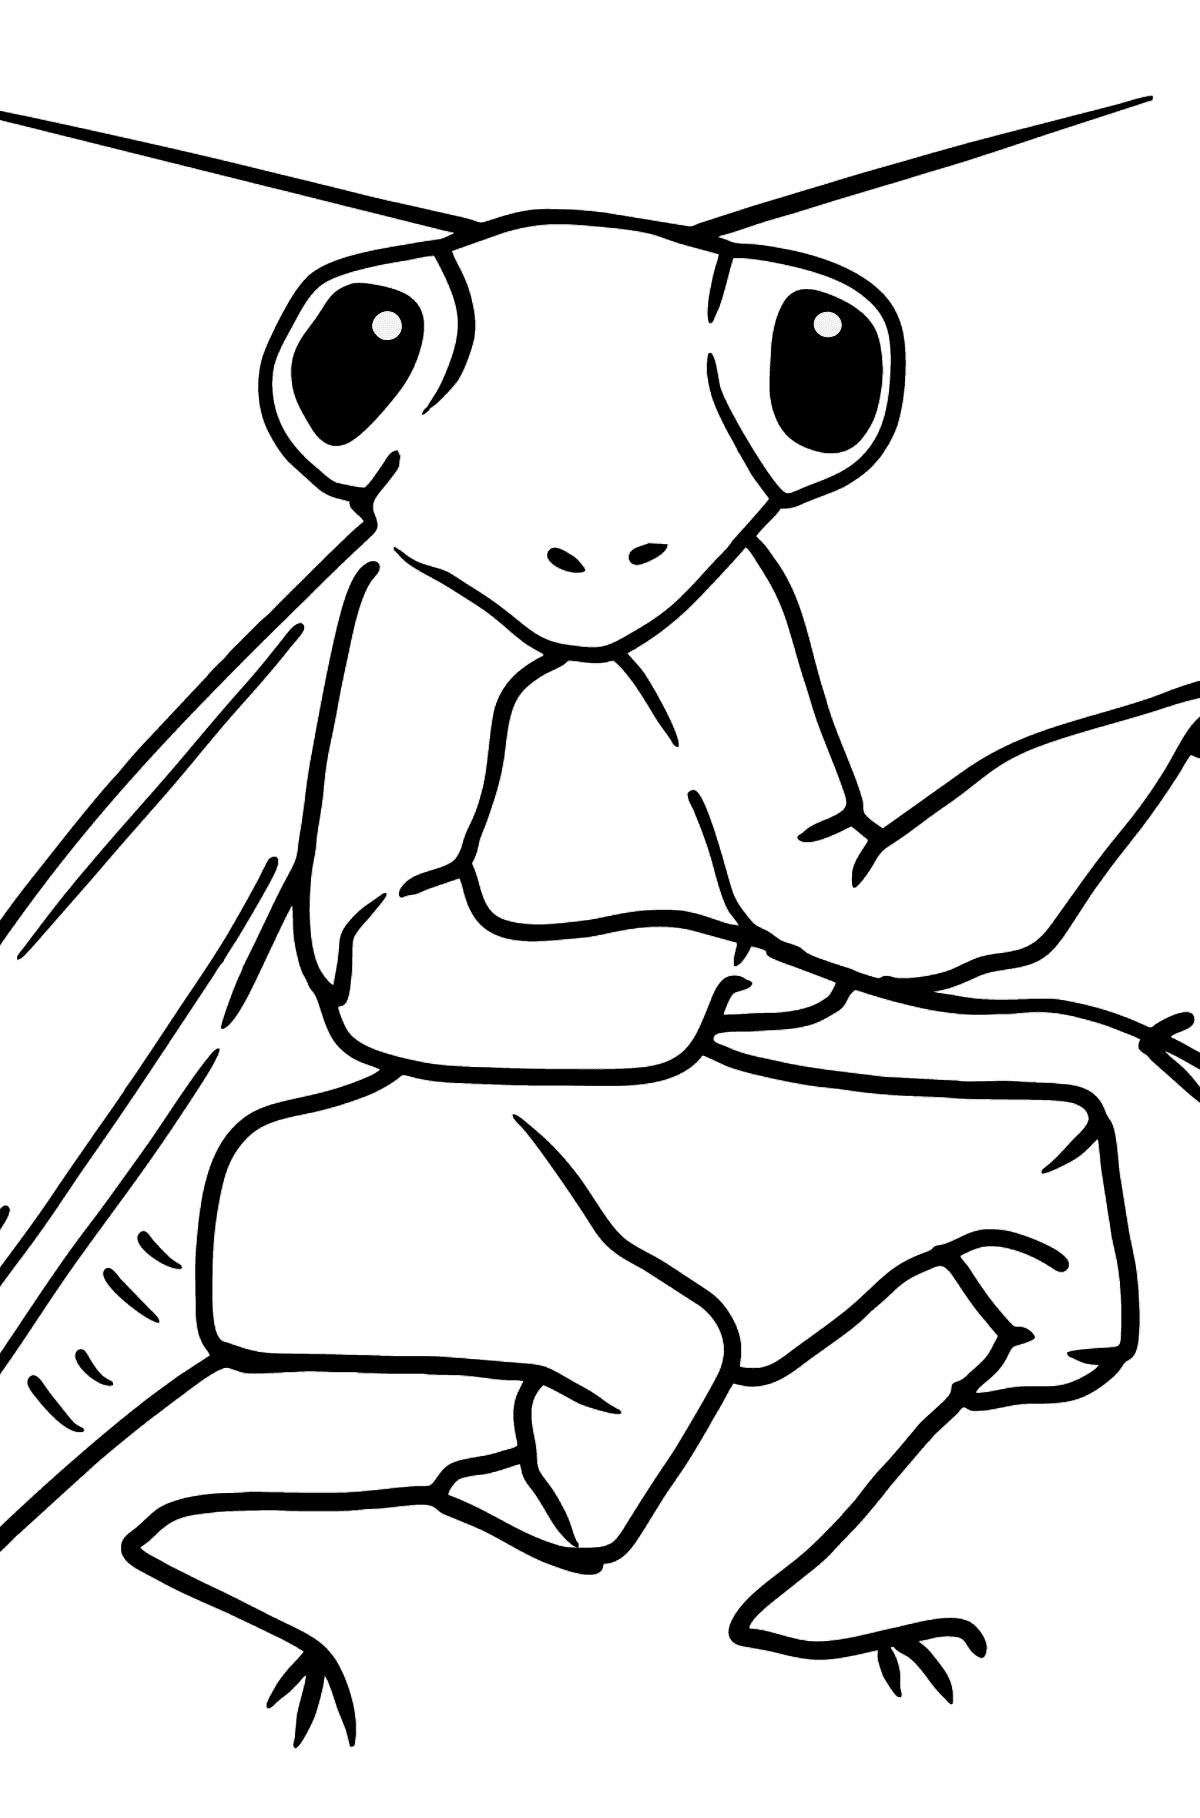 Mantis coloring page - Coloring Pages for Kids